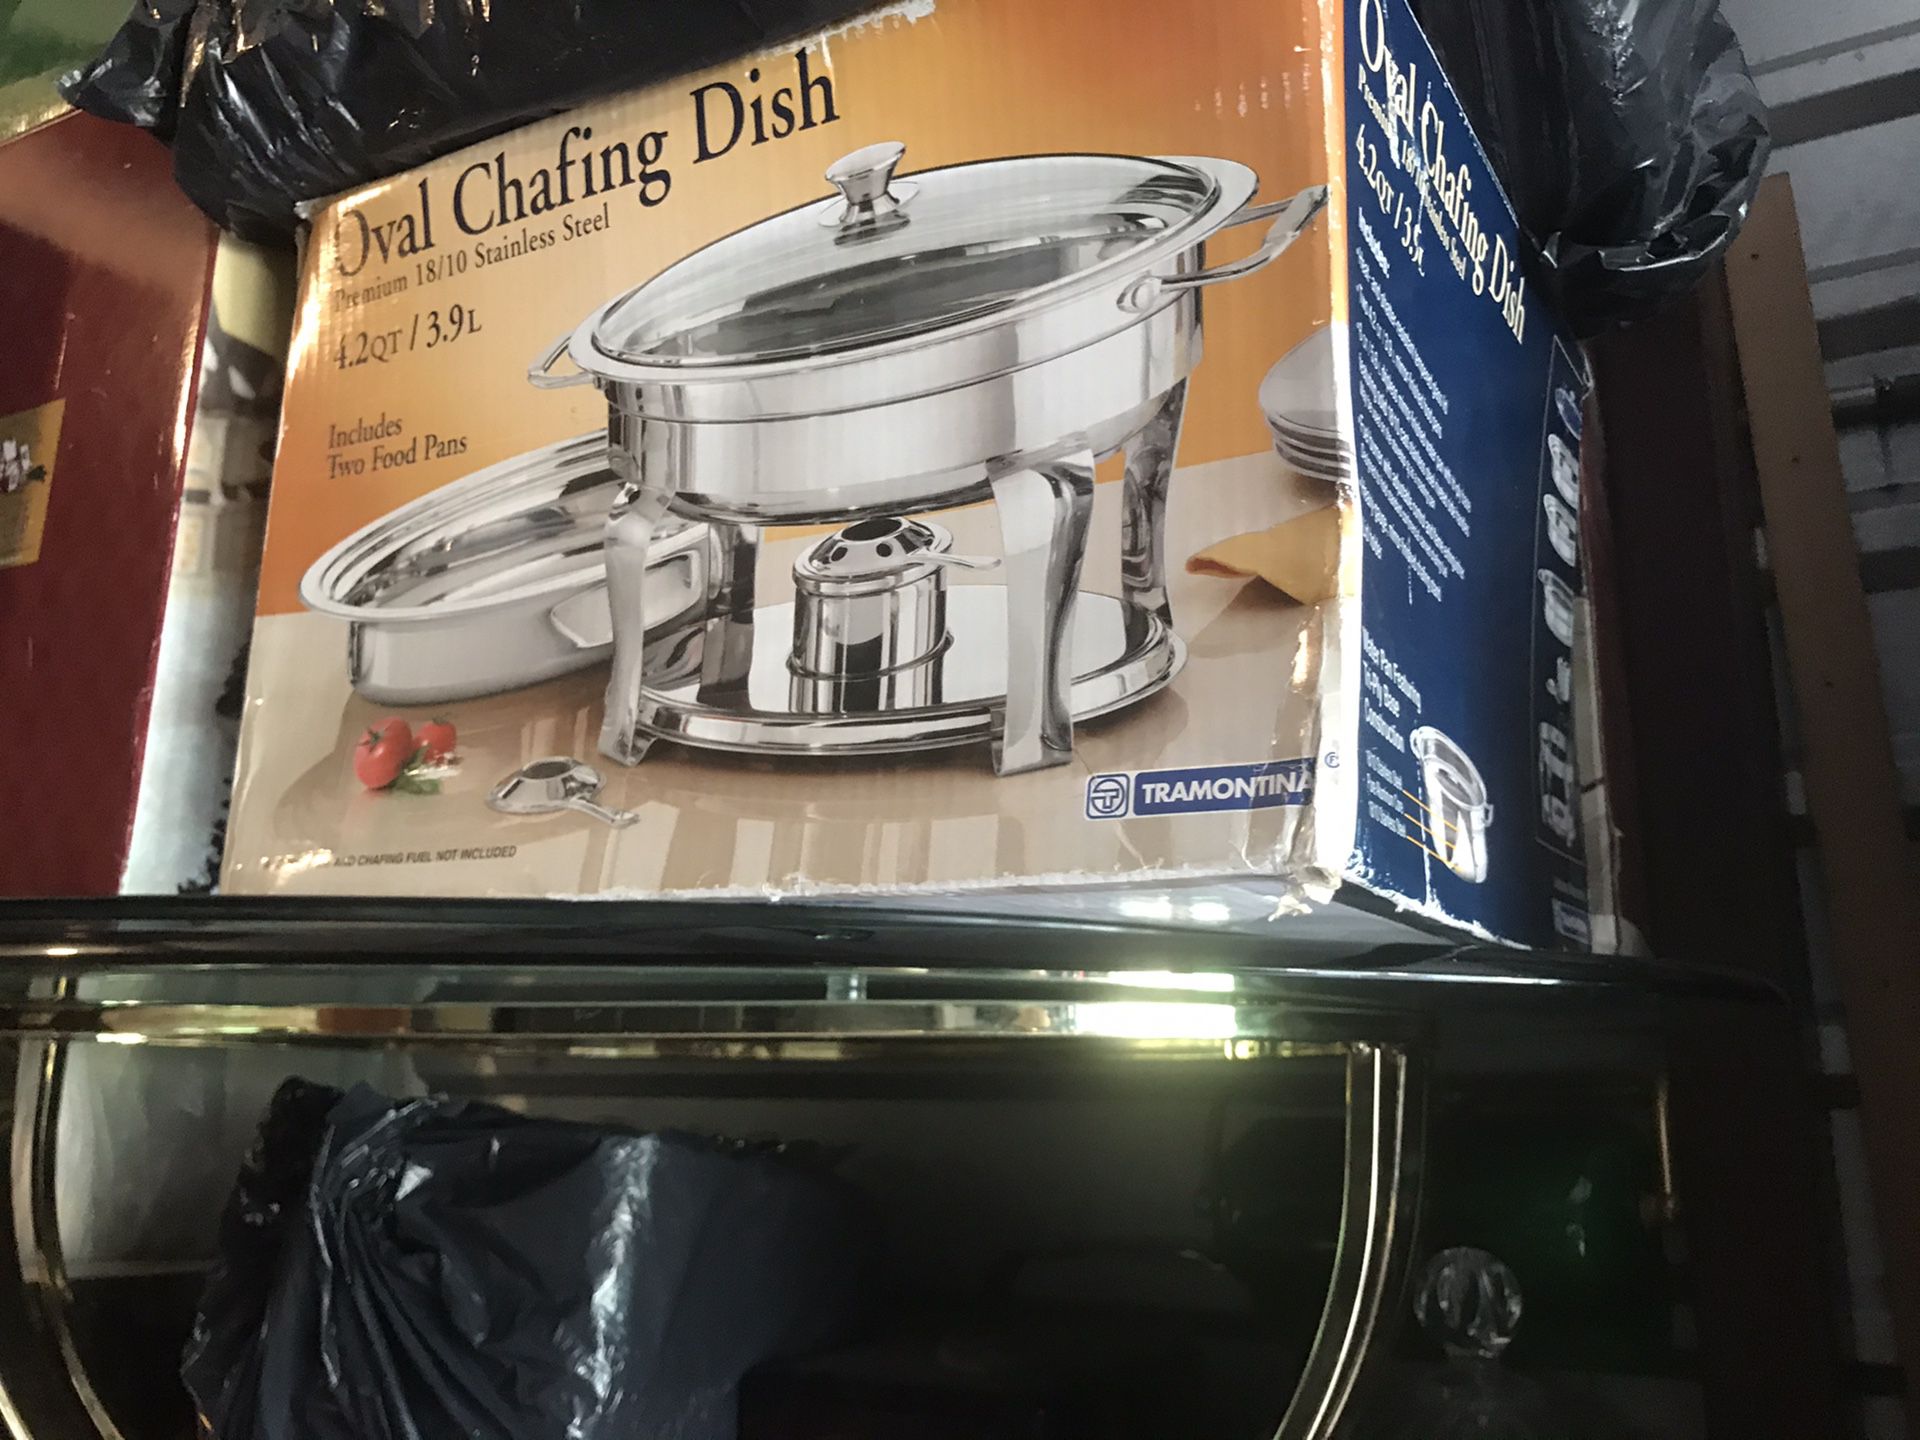 Chafing dishes and industrial size foil and wrap